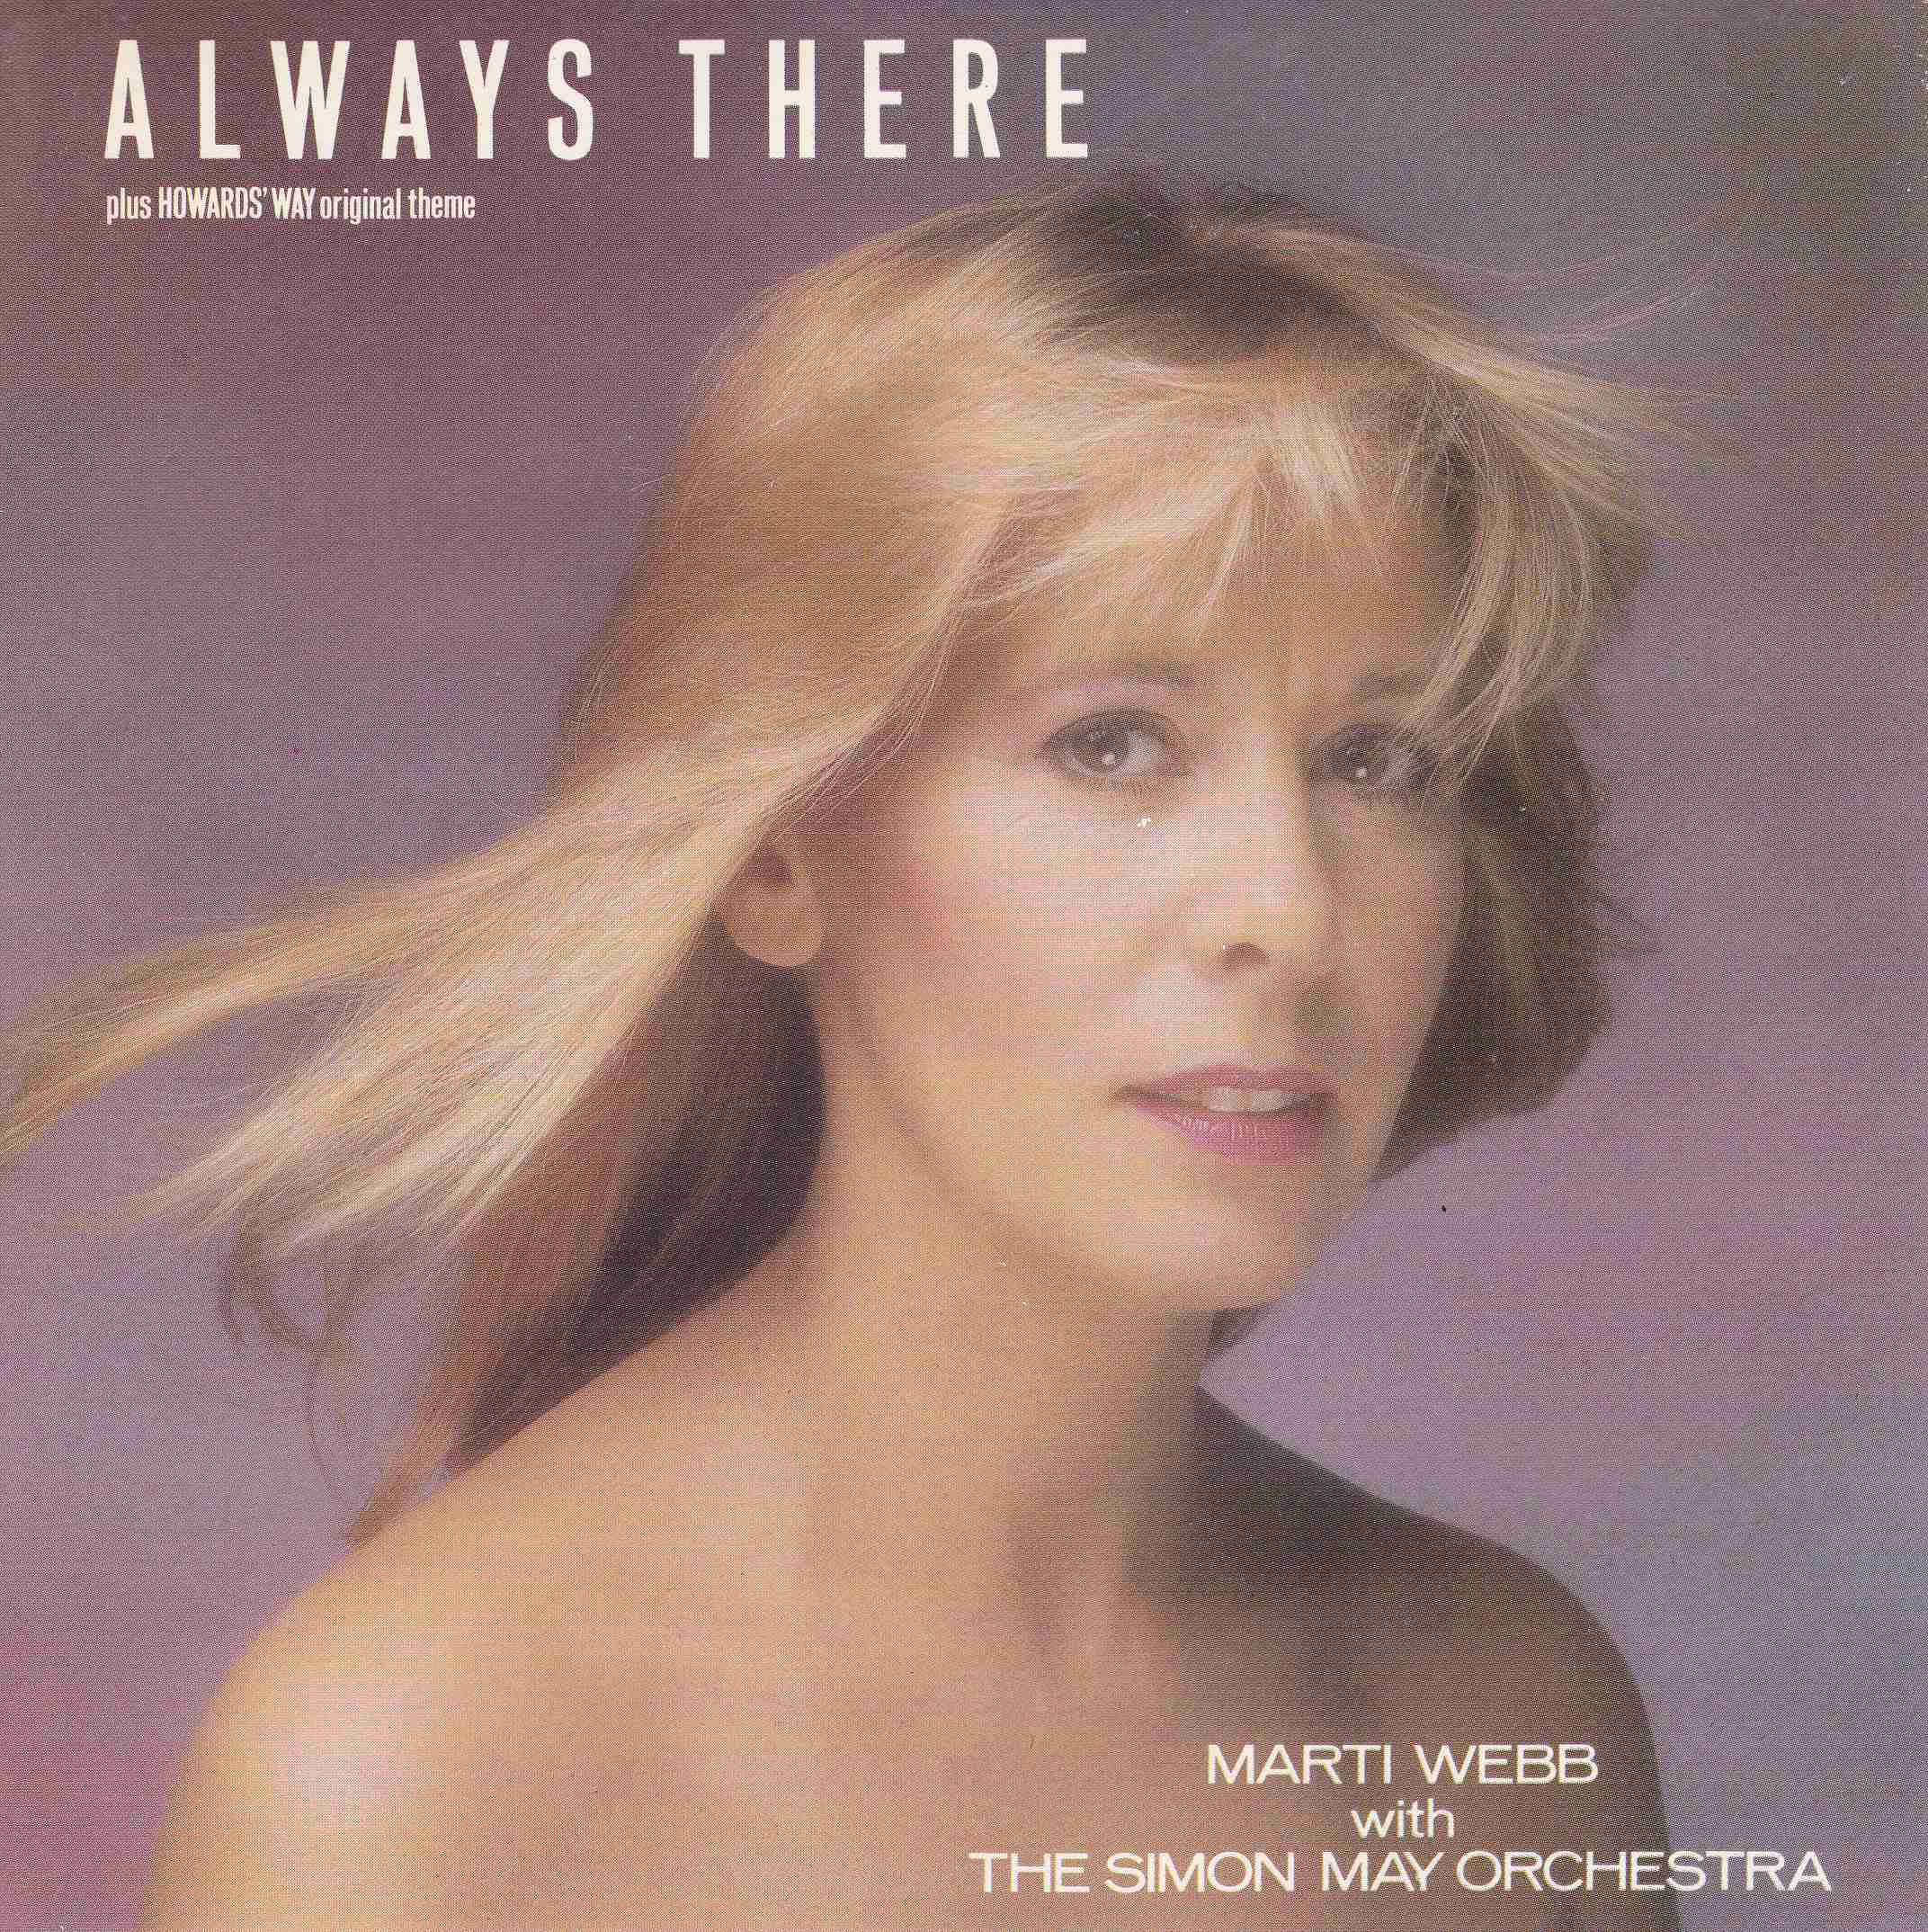 Picture of Always there (Howards' way) by artist Marti Webb with the Simon May Orchestra from the BBC singles - Records and Tapes library